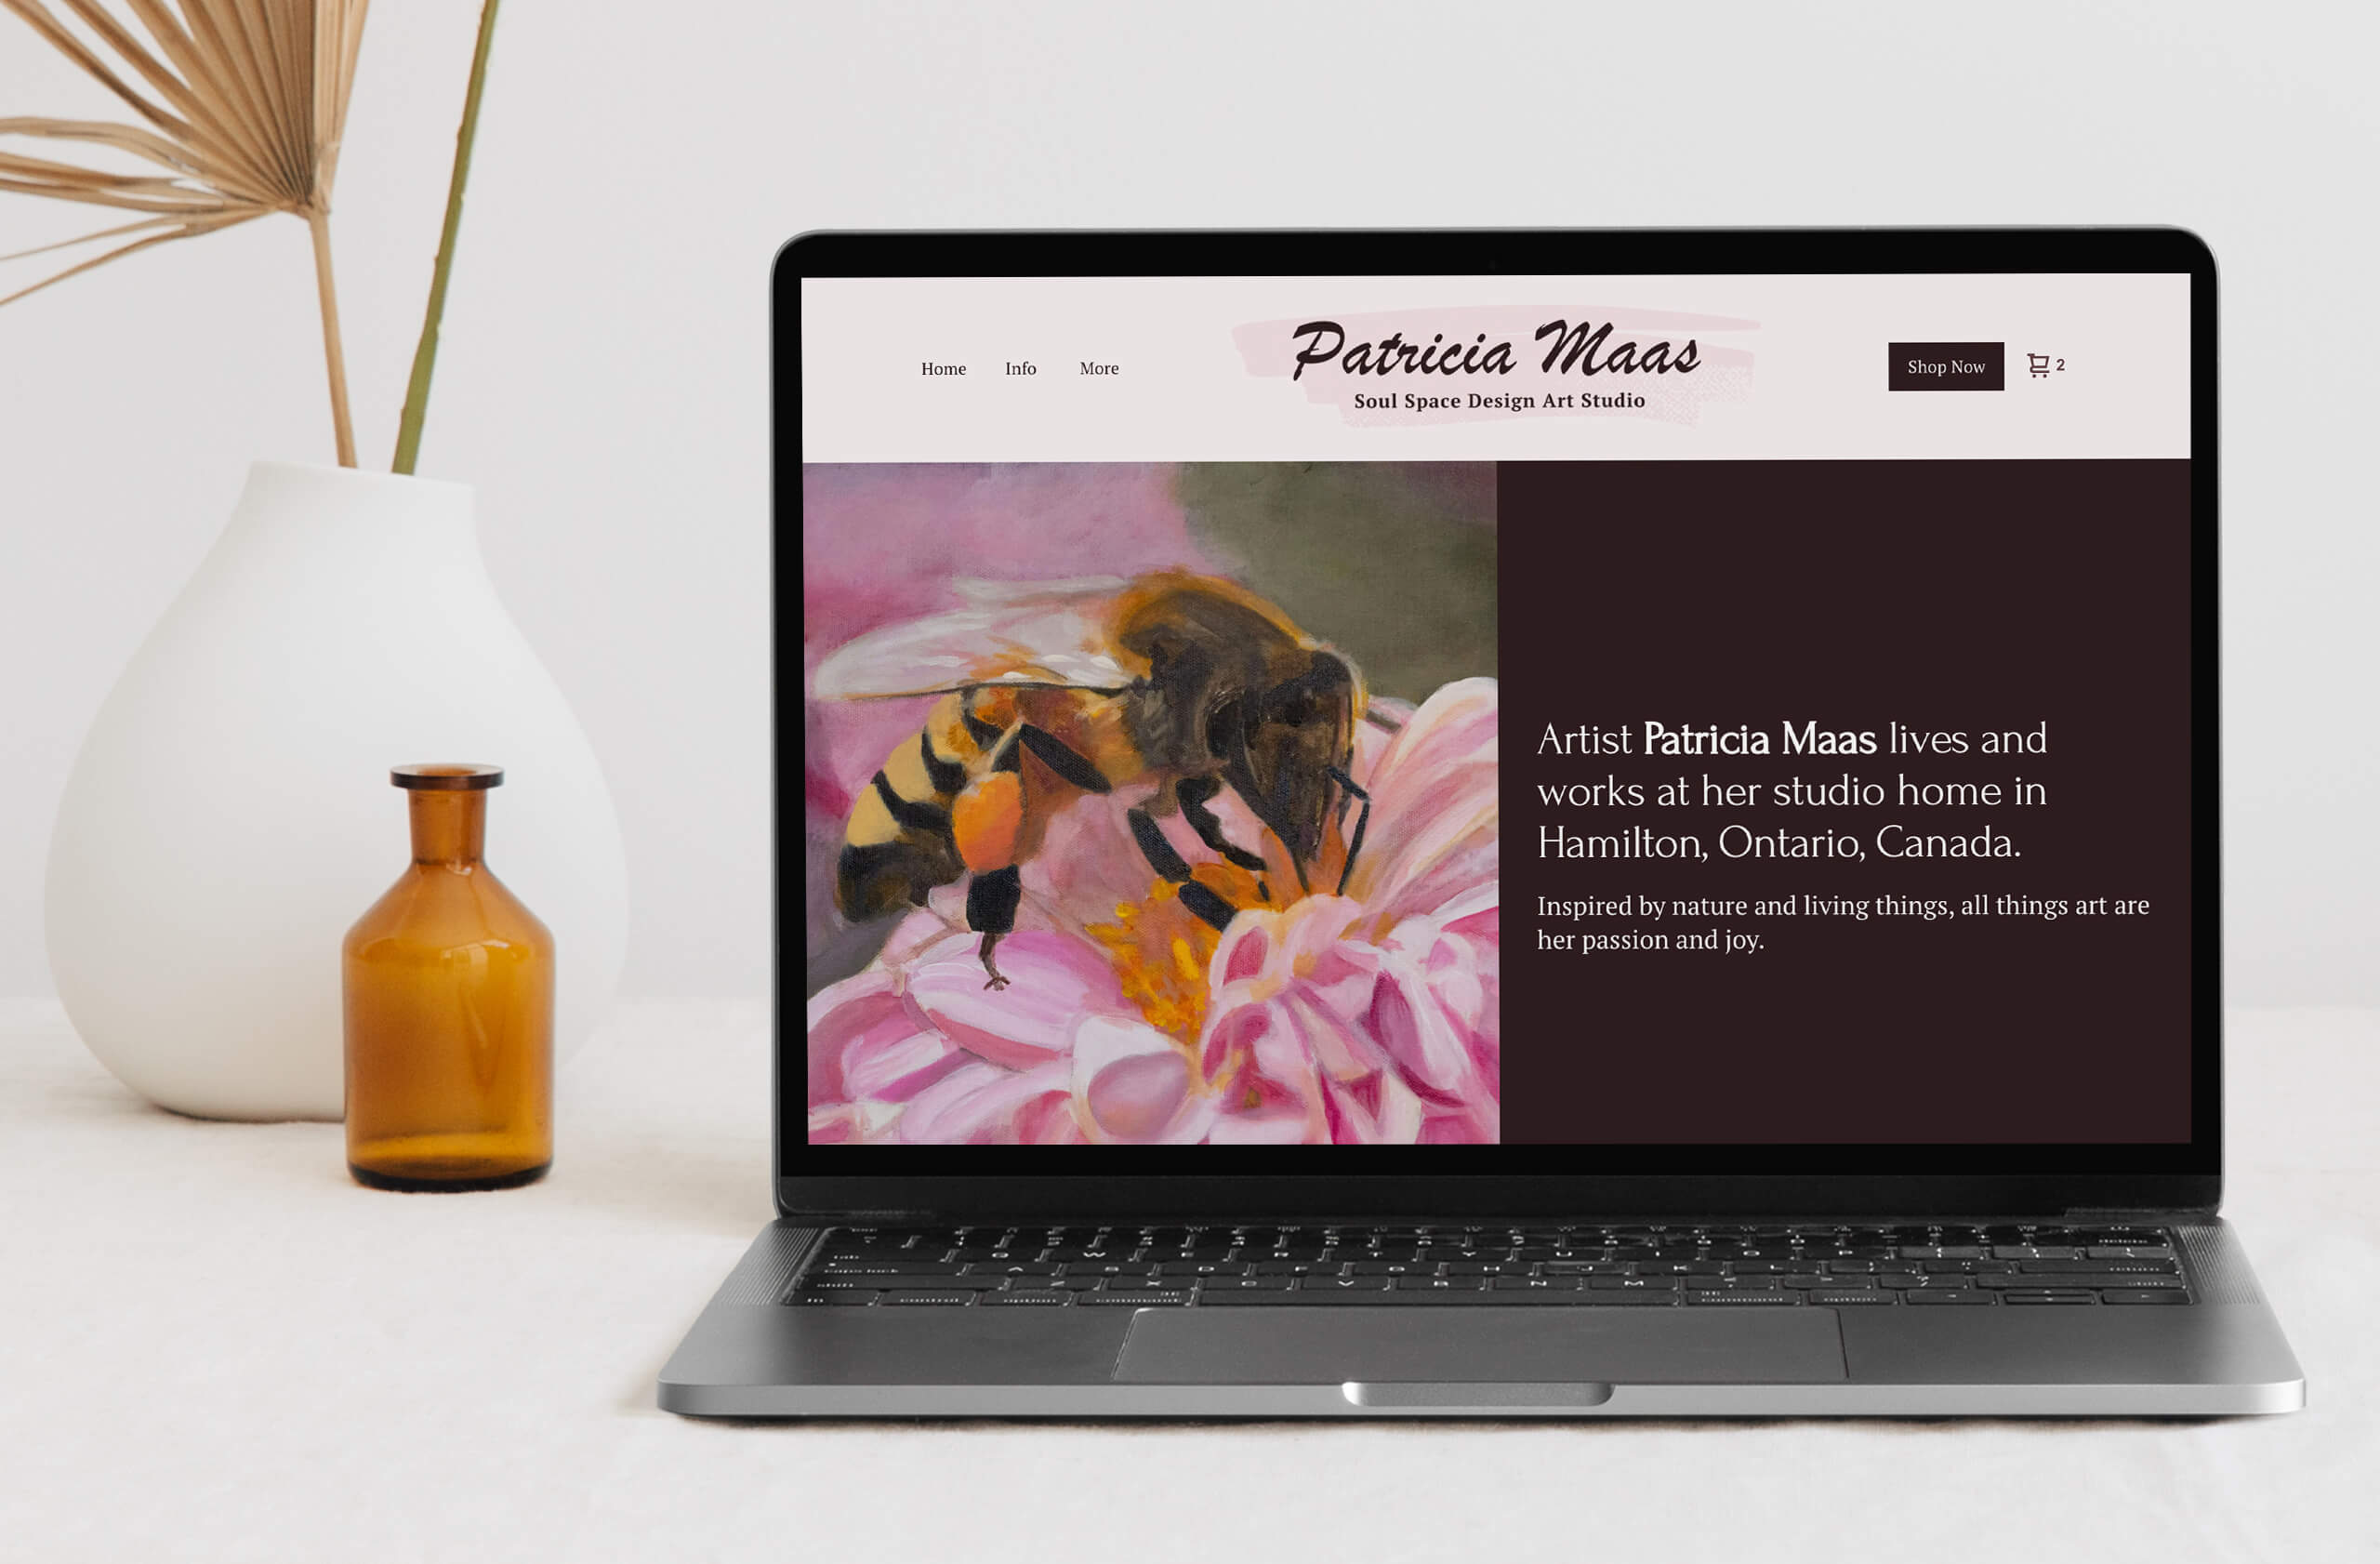 Website design, brand refinement, email marketing and social media marketing design for artist Patricia Maas by Catherine Toews Tulip Tree Creative